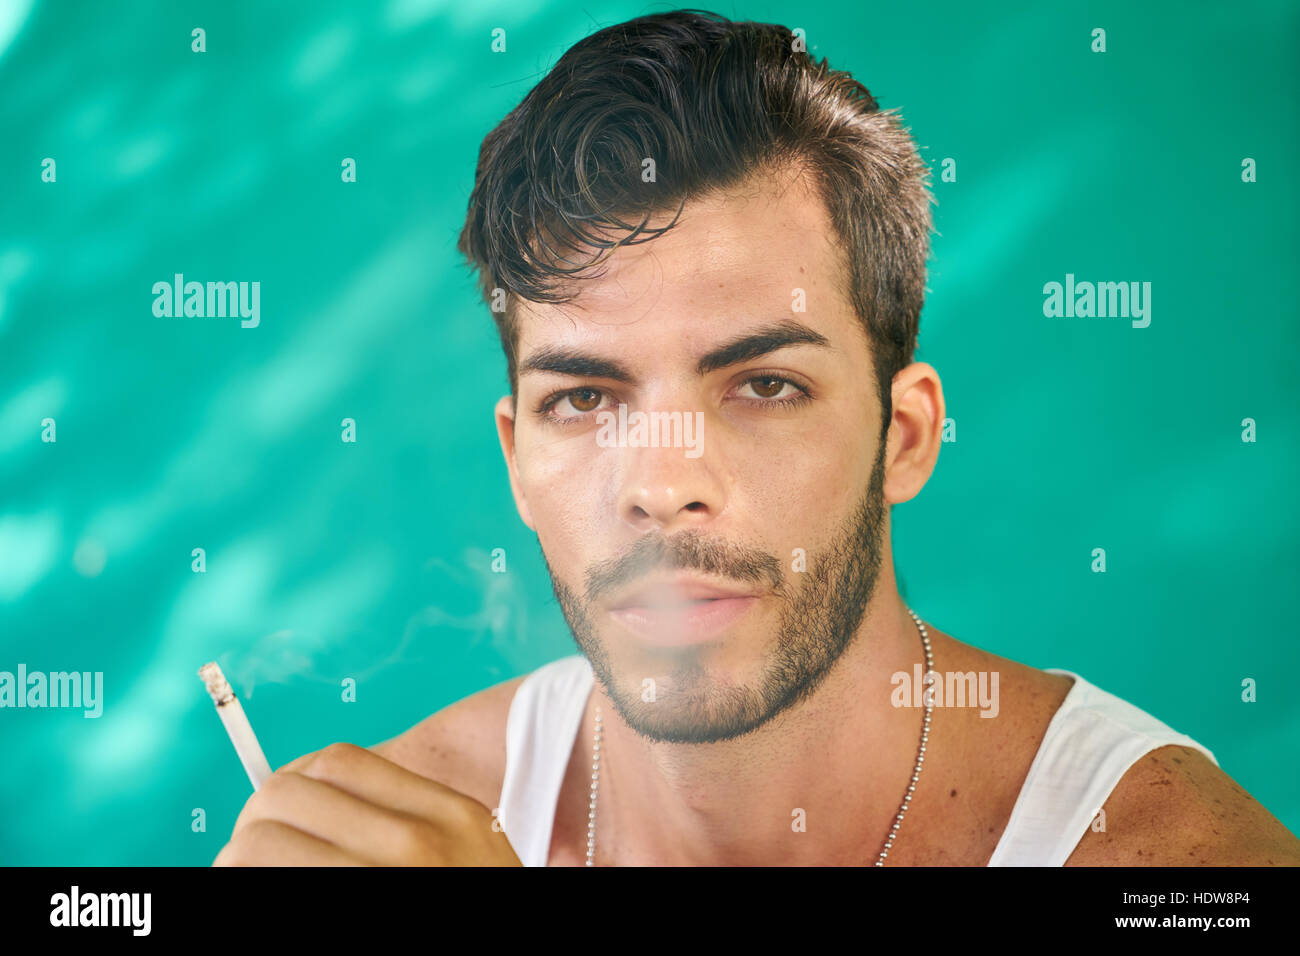 Real Cuban people and emotions, portrait of young hispanic man from Havana, Cuba looking at camera with serious expression, smoking cigarette and blow Stock Photo